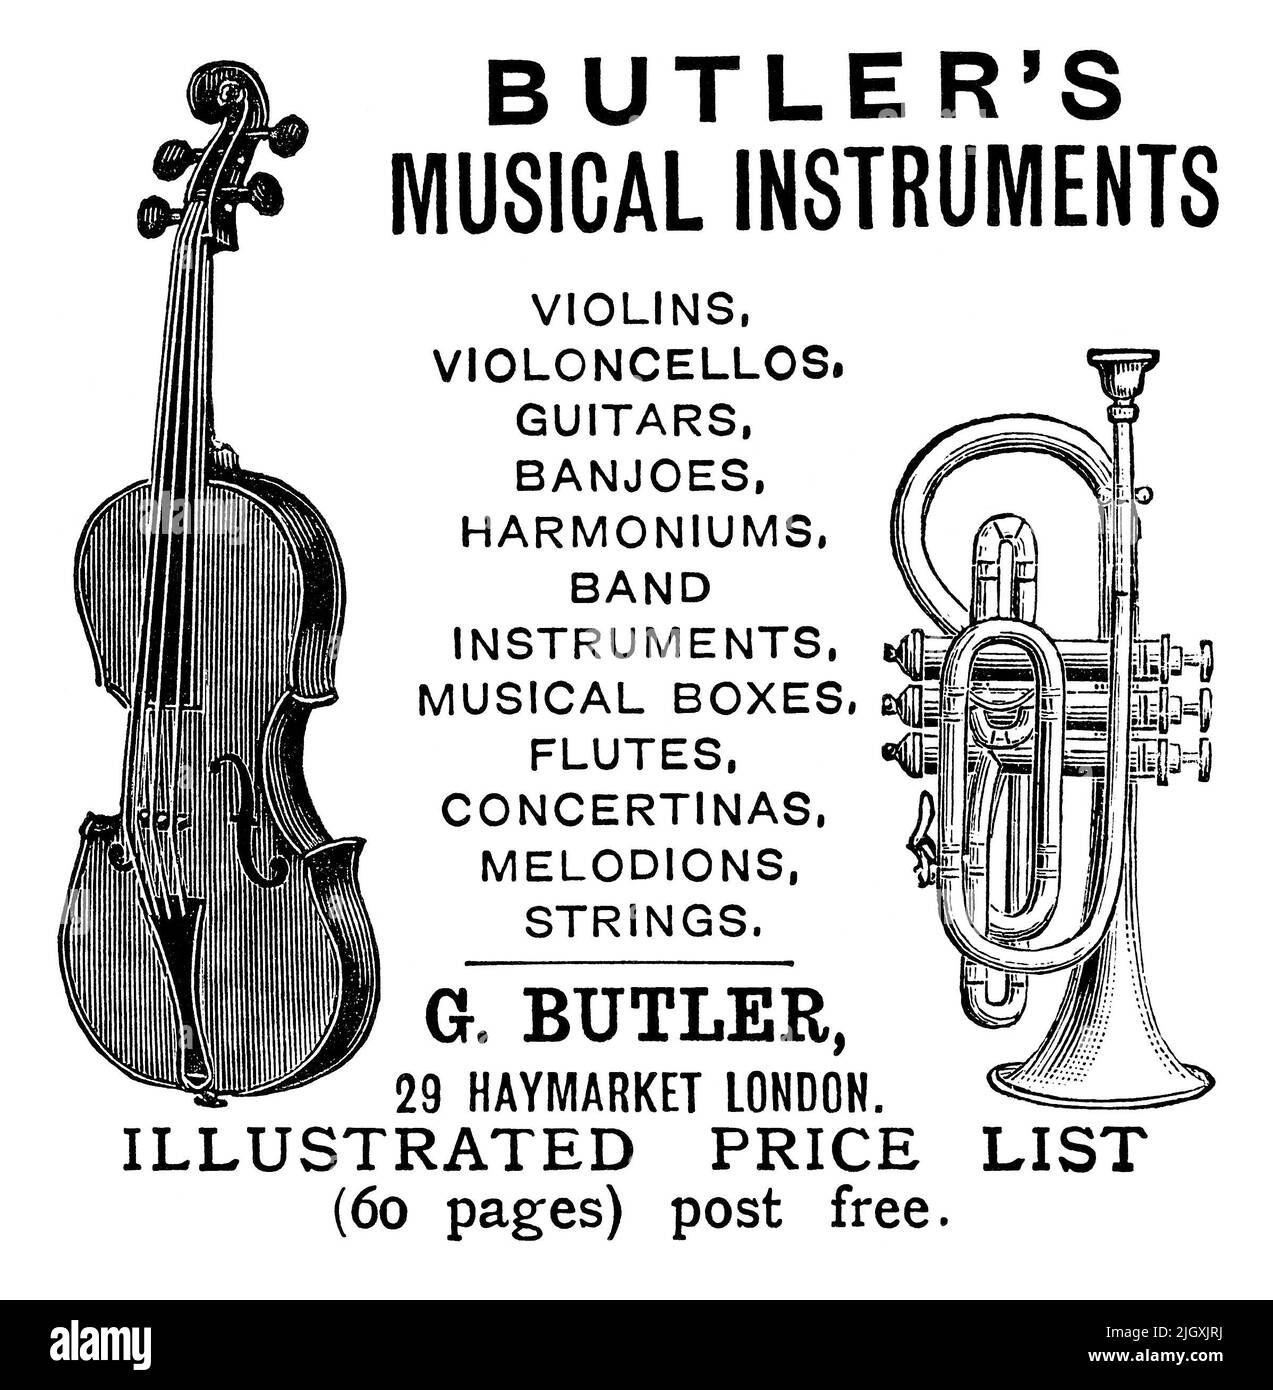 1887 British Victorian advertisement for Butler's Musical Instruments. Stock Photo